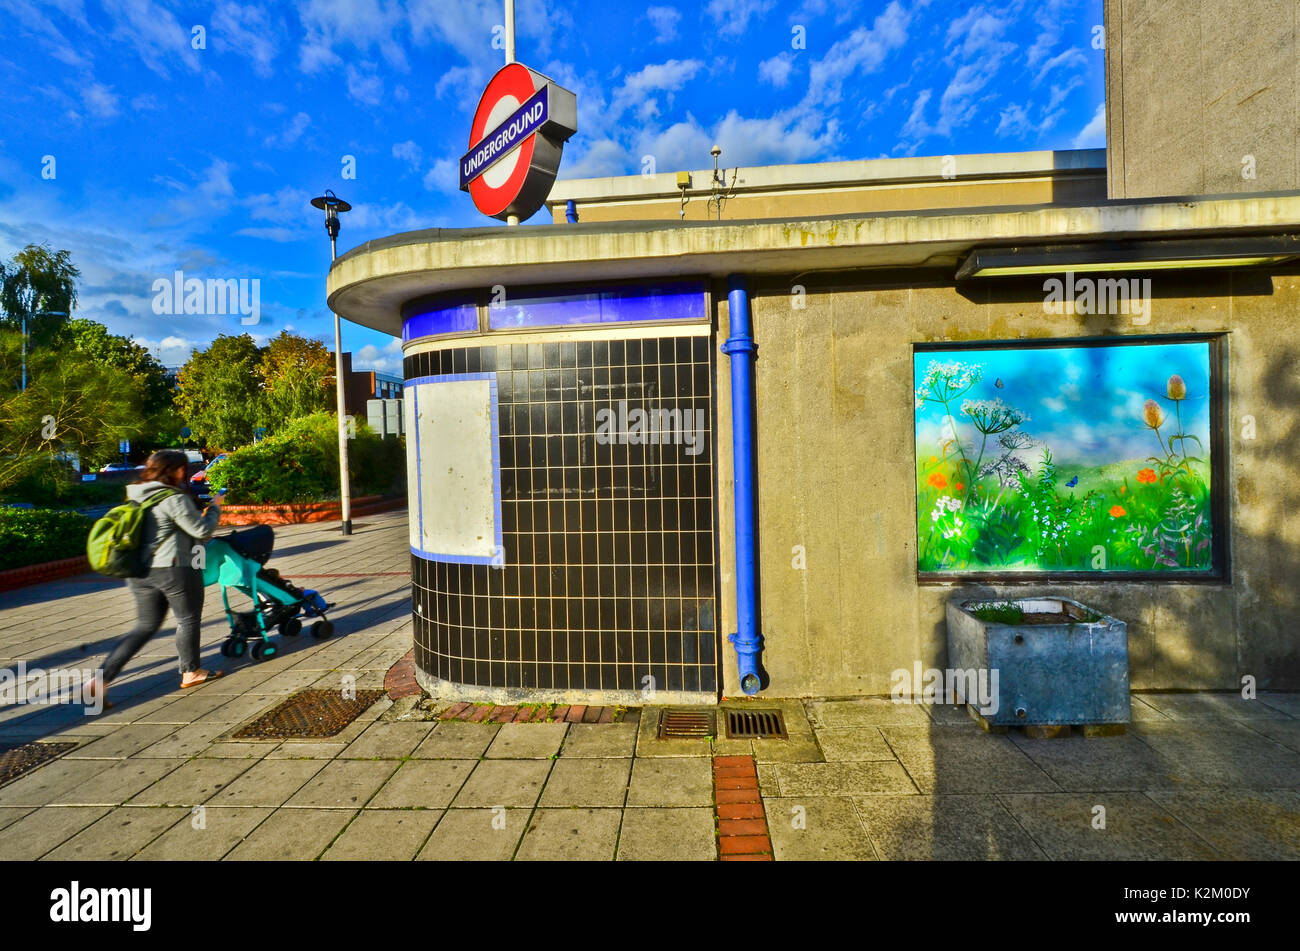 Wanstead Central line underground station with a mural of countryside on the wall. An old water tank is used as a planter. Stock Photo